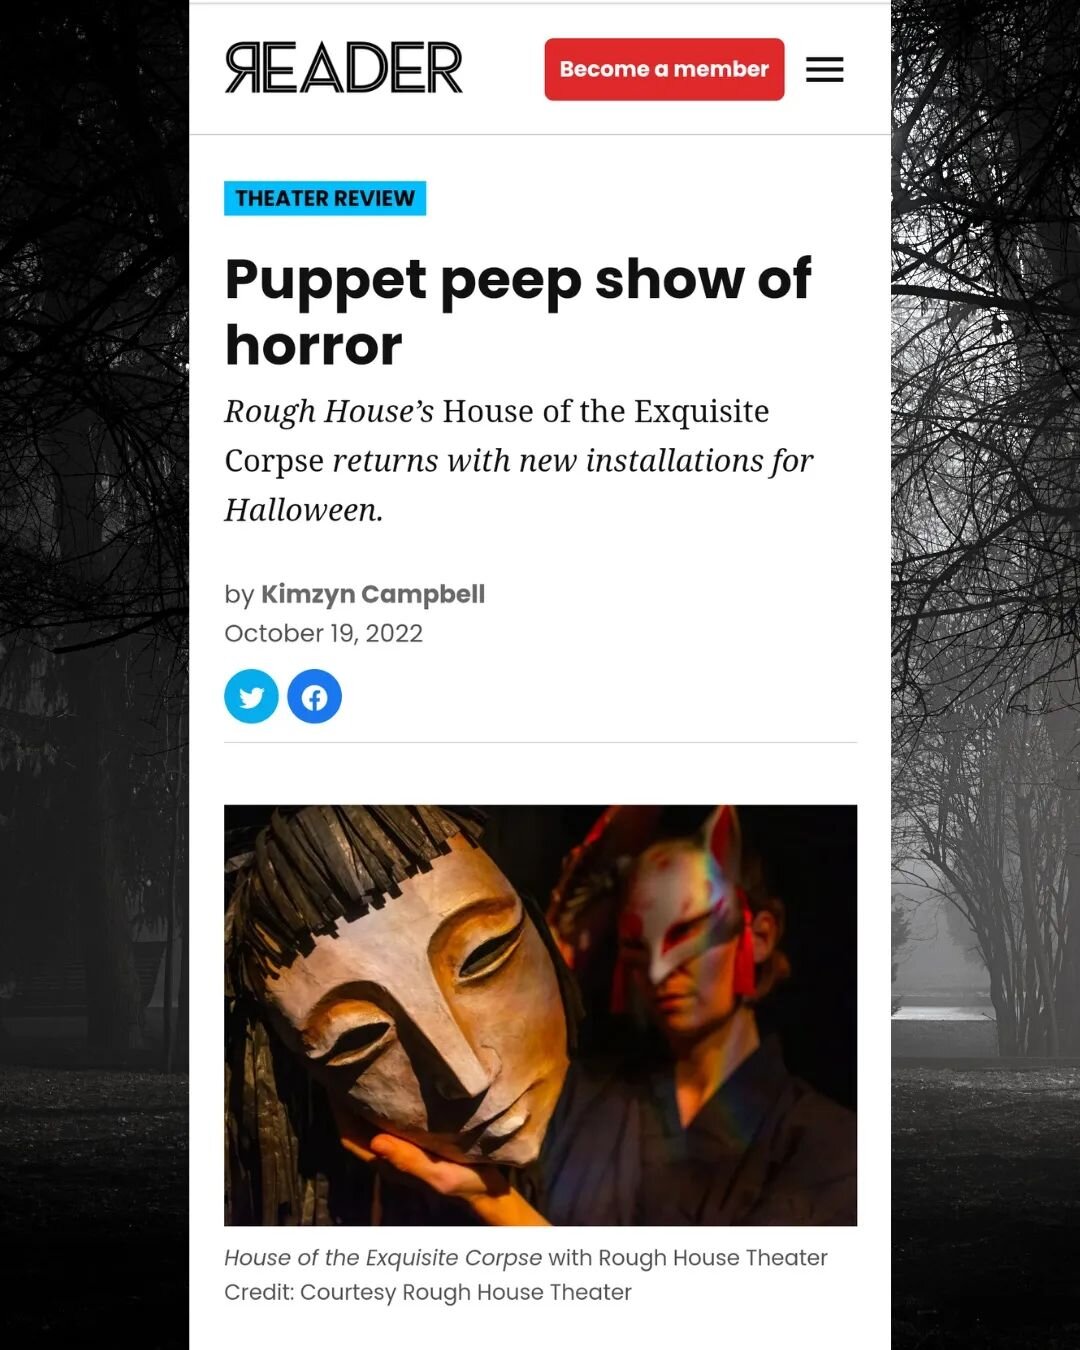 We recieved a great review from the Chicago Reader!  Swipe to read some highlights from our praise-worthy puppetry! Tickets available on our website for Thu, Fri, and Sat! After these reviews, they are going fast! 🔥🔥🔥
Find the full article online!